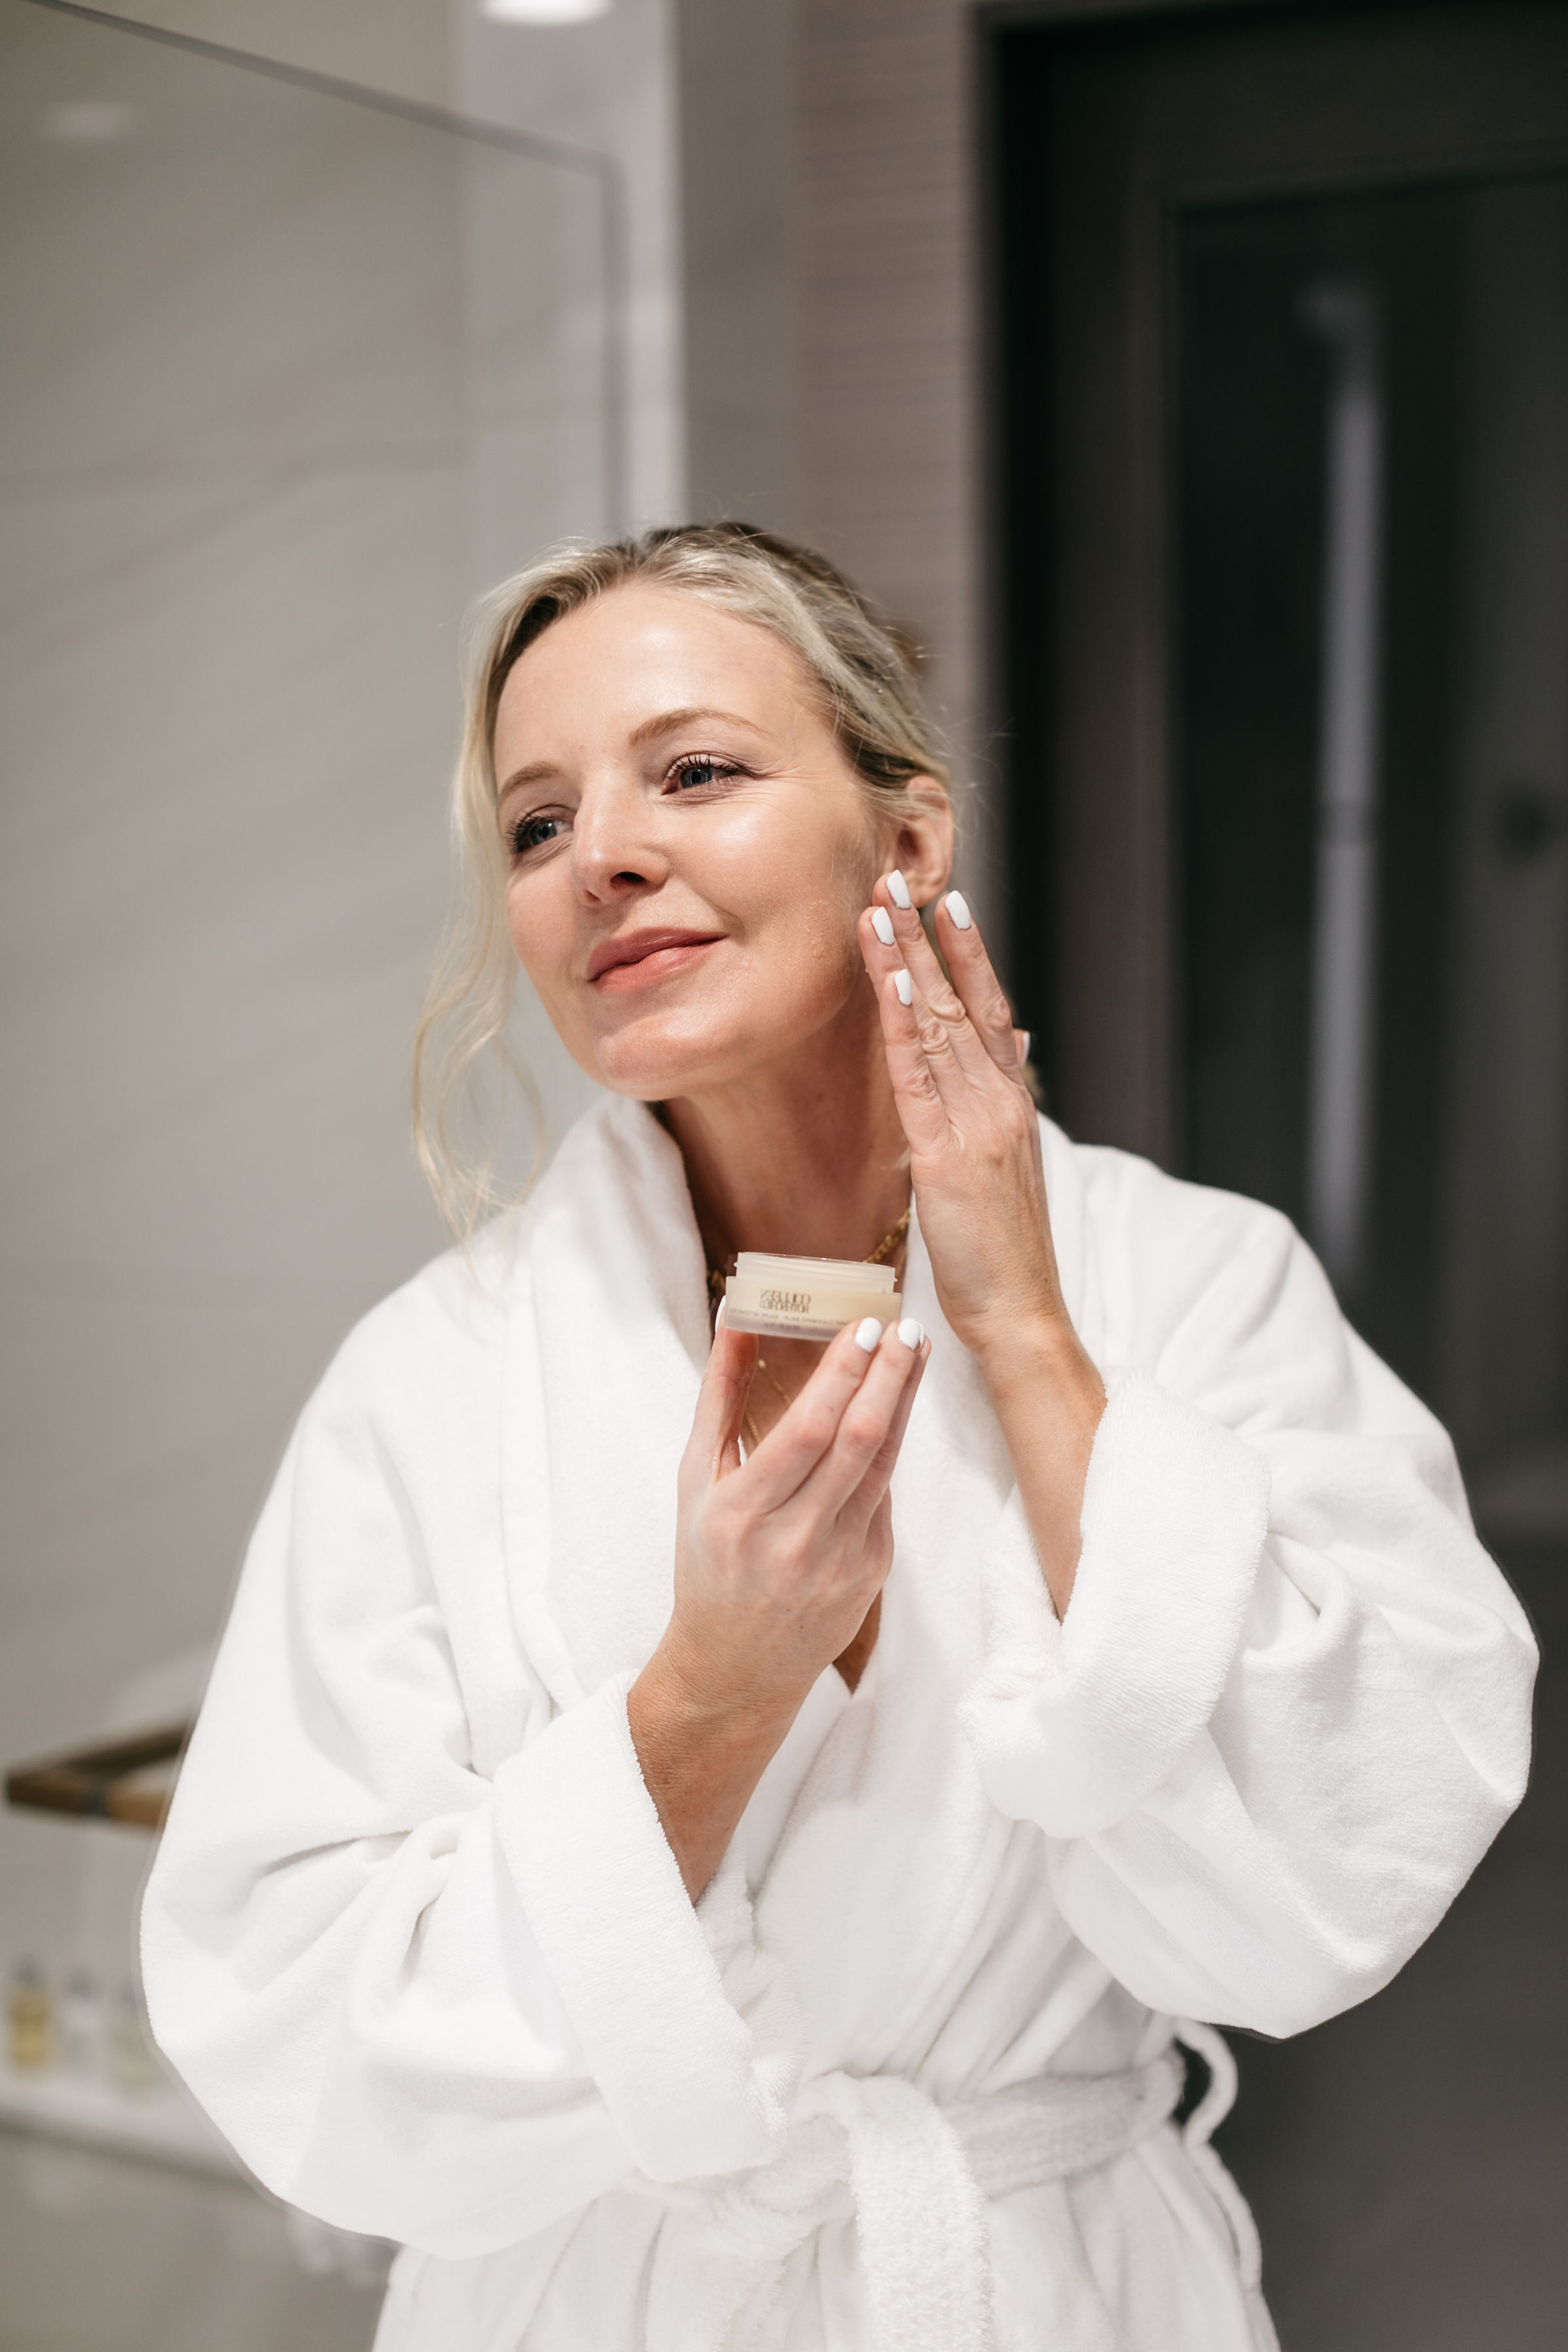 Anti-Aging Skincare, Fashion blogger over 40, Erin Busbee of BusbeeStyle.com featuring the Colleen Rothschild Discovery Collection skincare kit including the Radiant Cleansing Balm